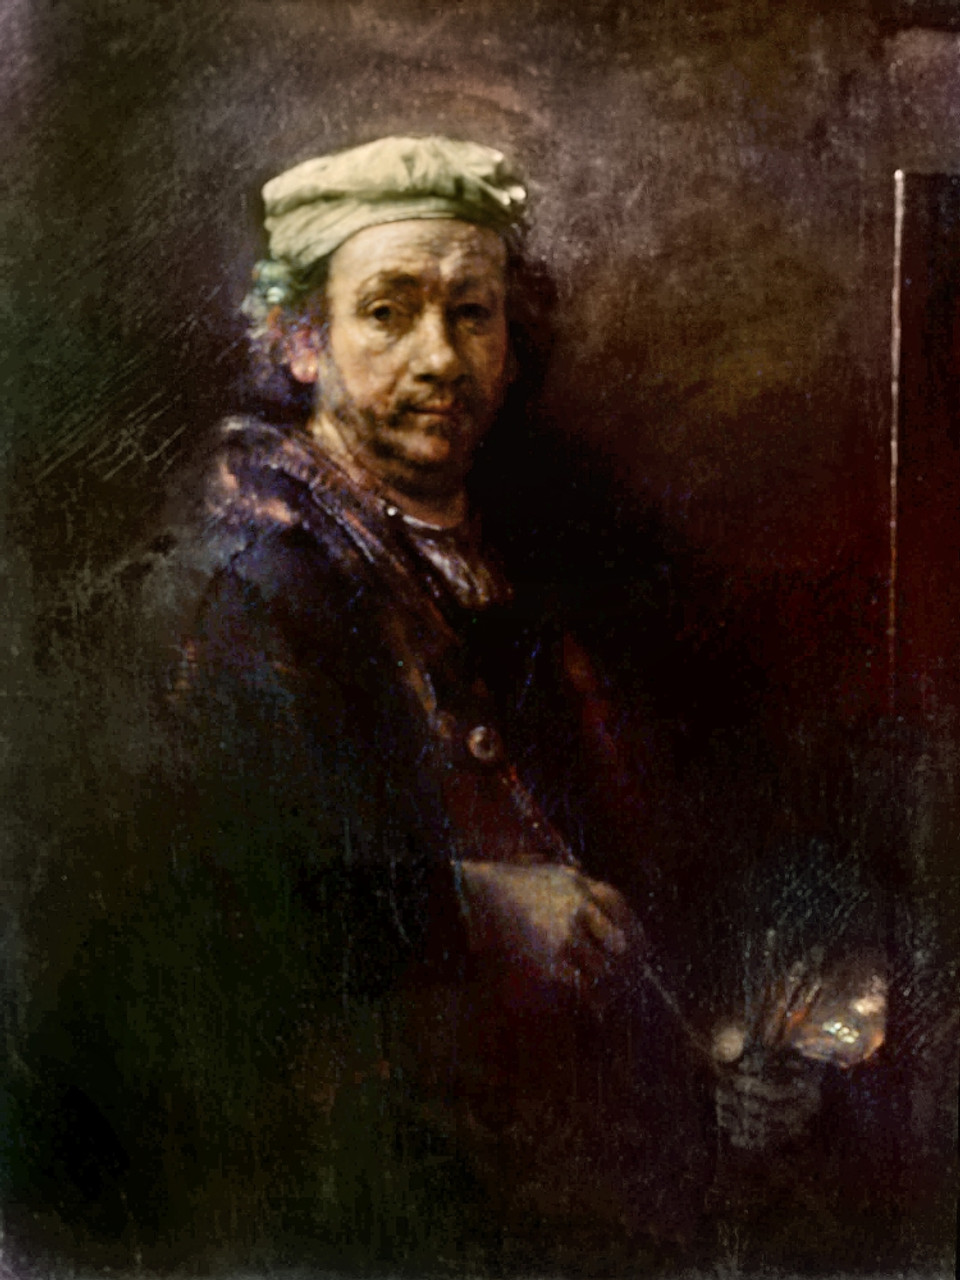 Rembrandt: Self-Portrait. /Nself-Portrait At Poster 1660. Oil Rembrandt By Print # Collection Easel. - Posterazzi Item Van Rijn, VARGRC0054419 - On Canvas His Granger by